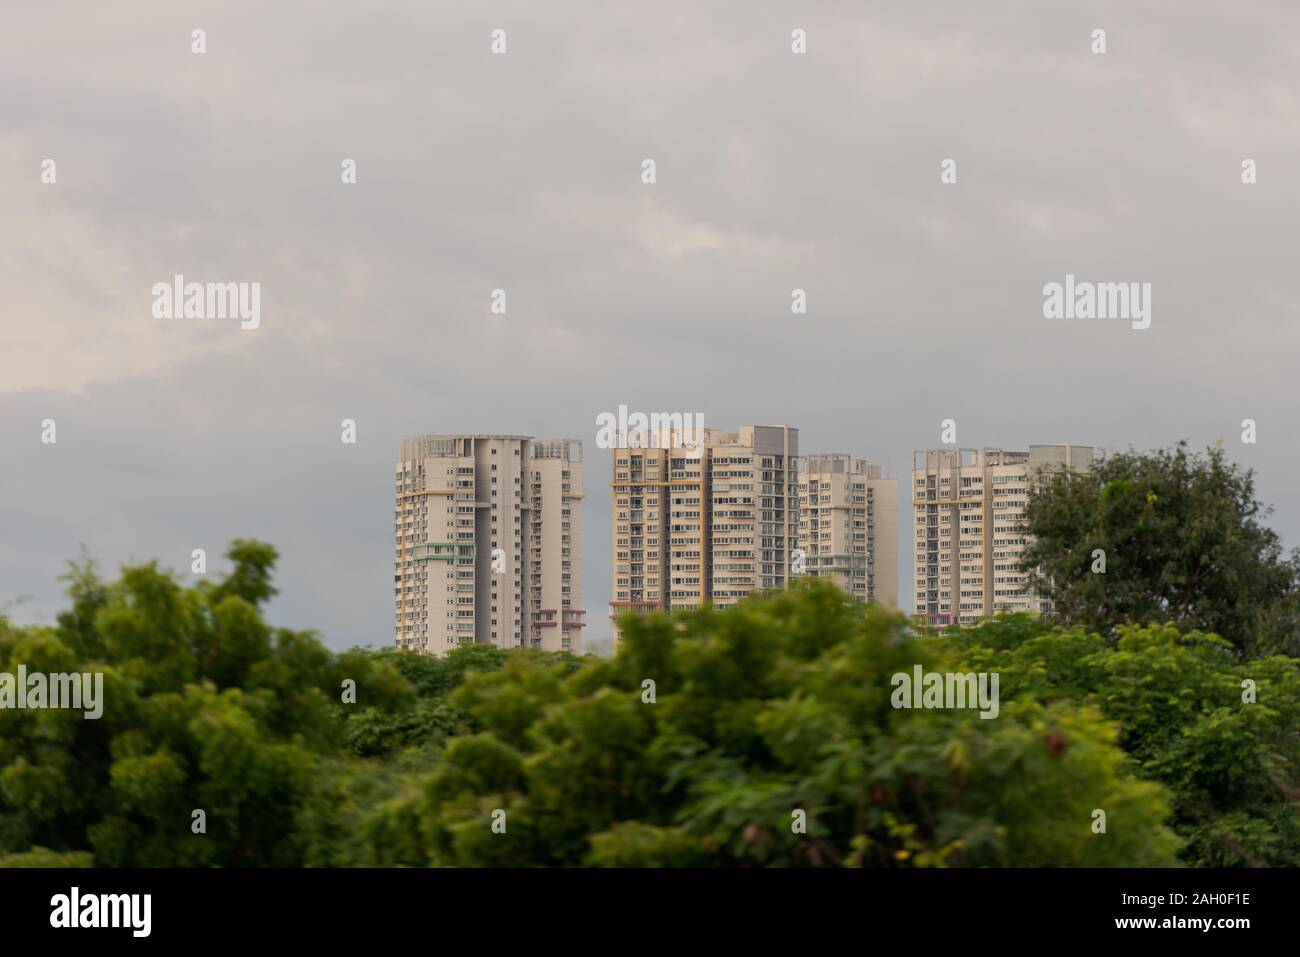 Skyscrapers behind line of trees with cloudy sky in Chennai, former Madras, in South India Stock Photo